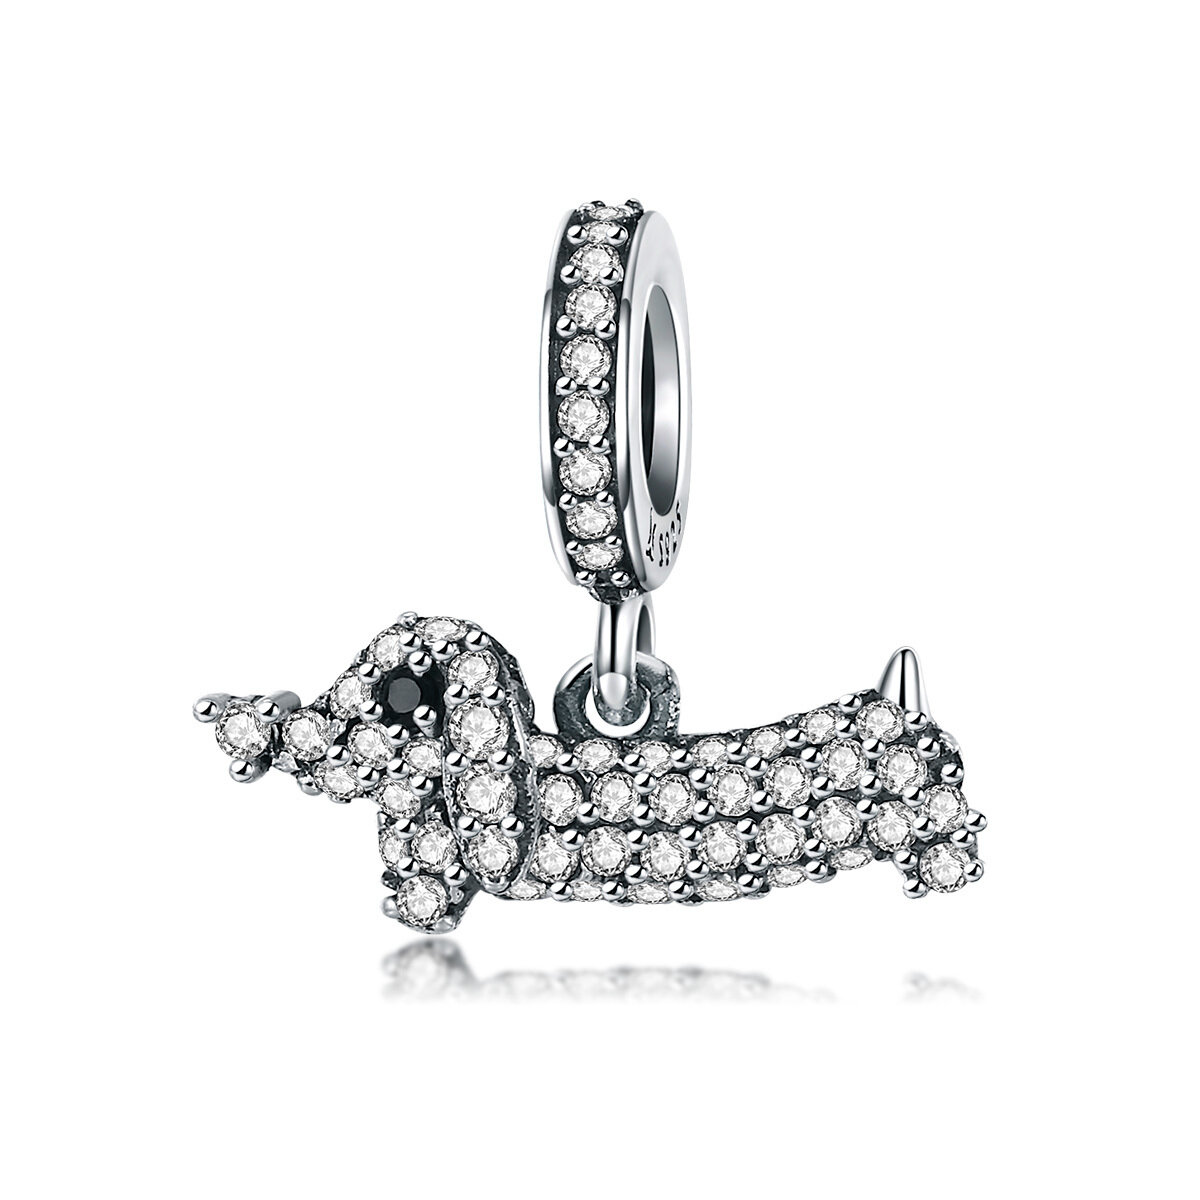 GemKing SCC709 the Dachshund S925 Sterling Silver Charm